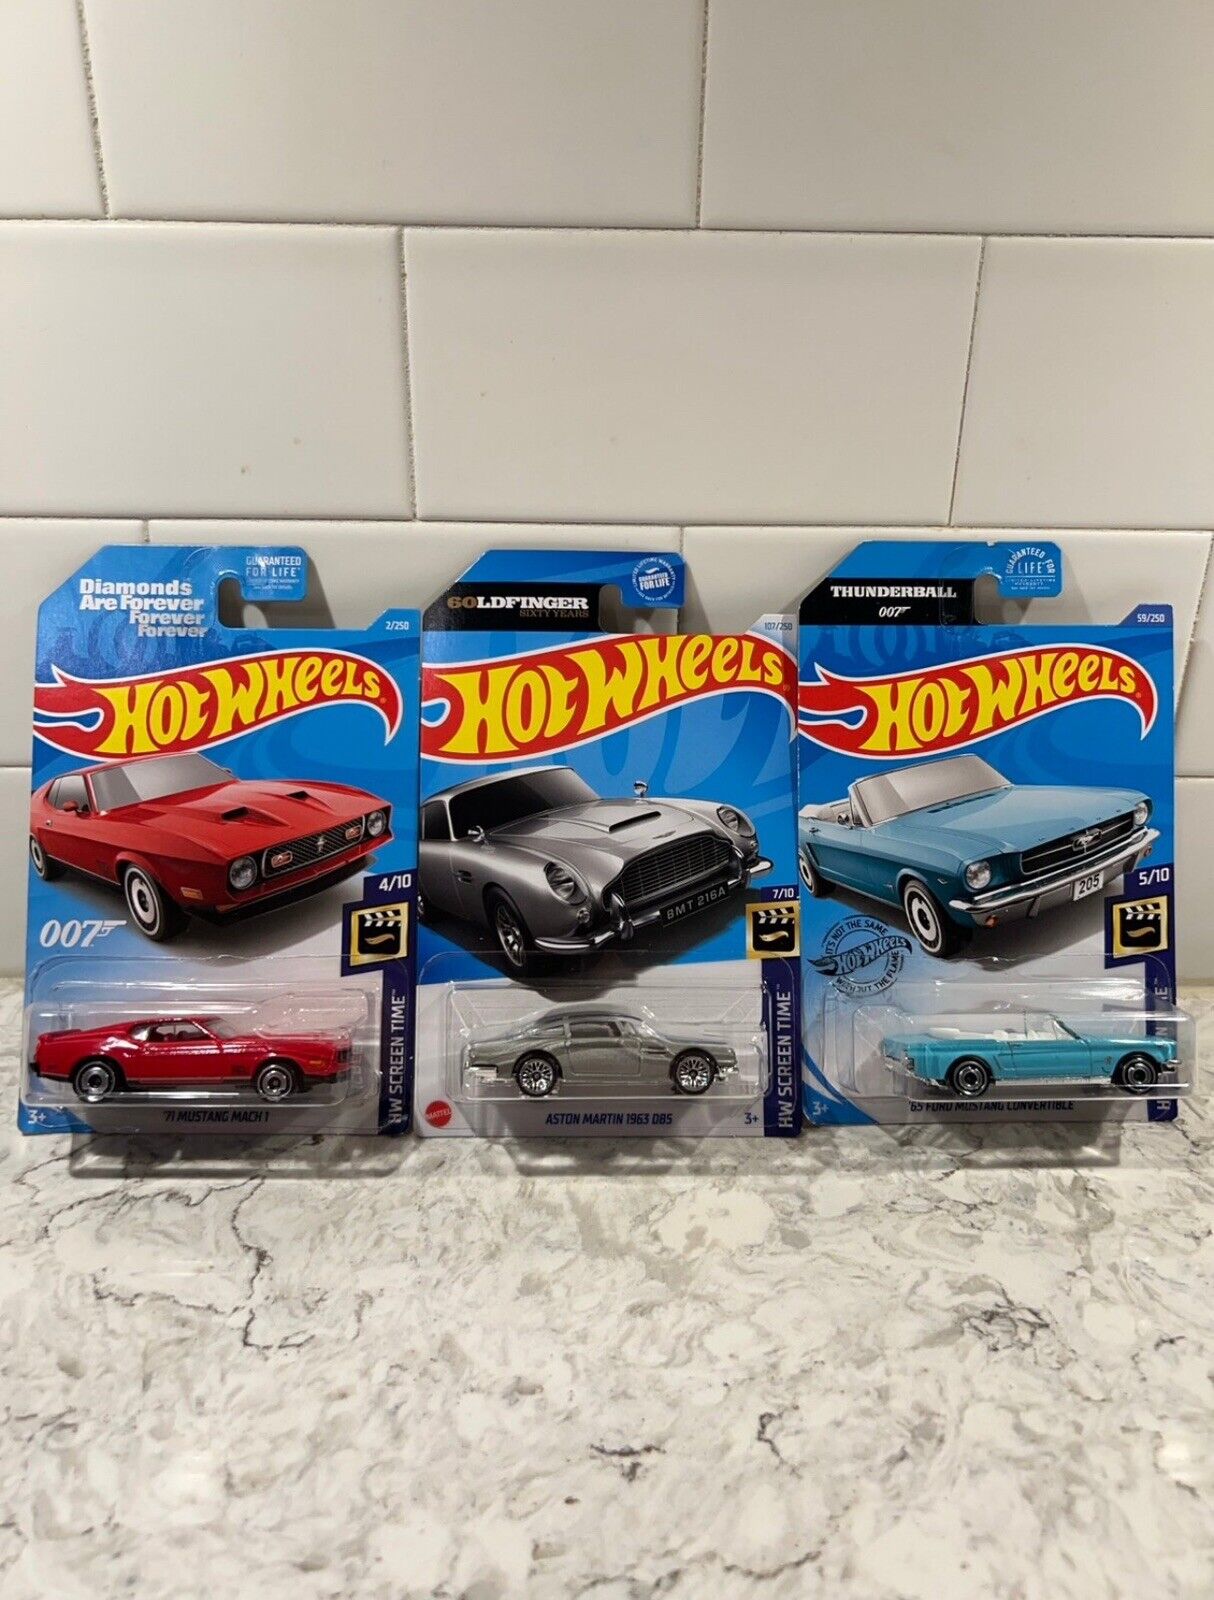 Hot Wheels "007" MUSTANG And MARTIN Lot Of 3 2017 & 2018 HW Screen Time 